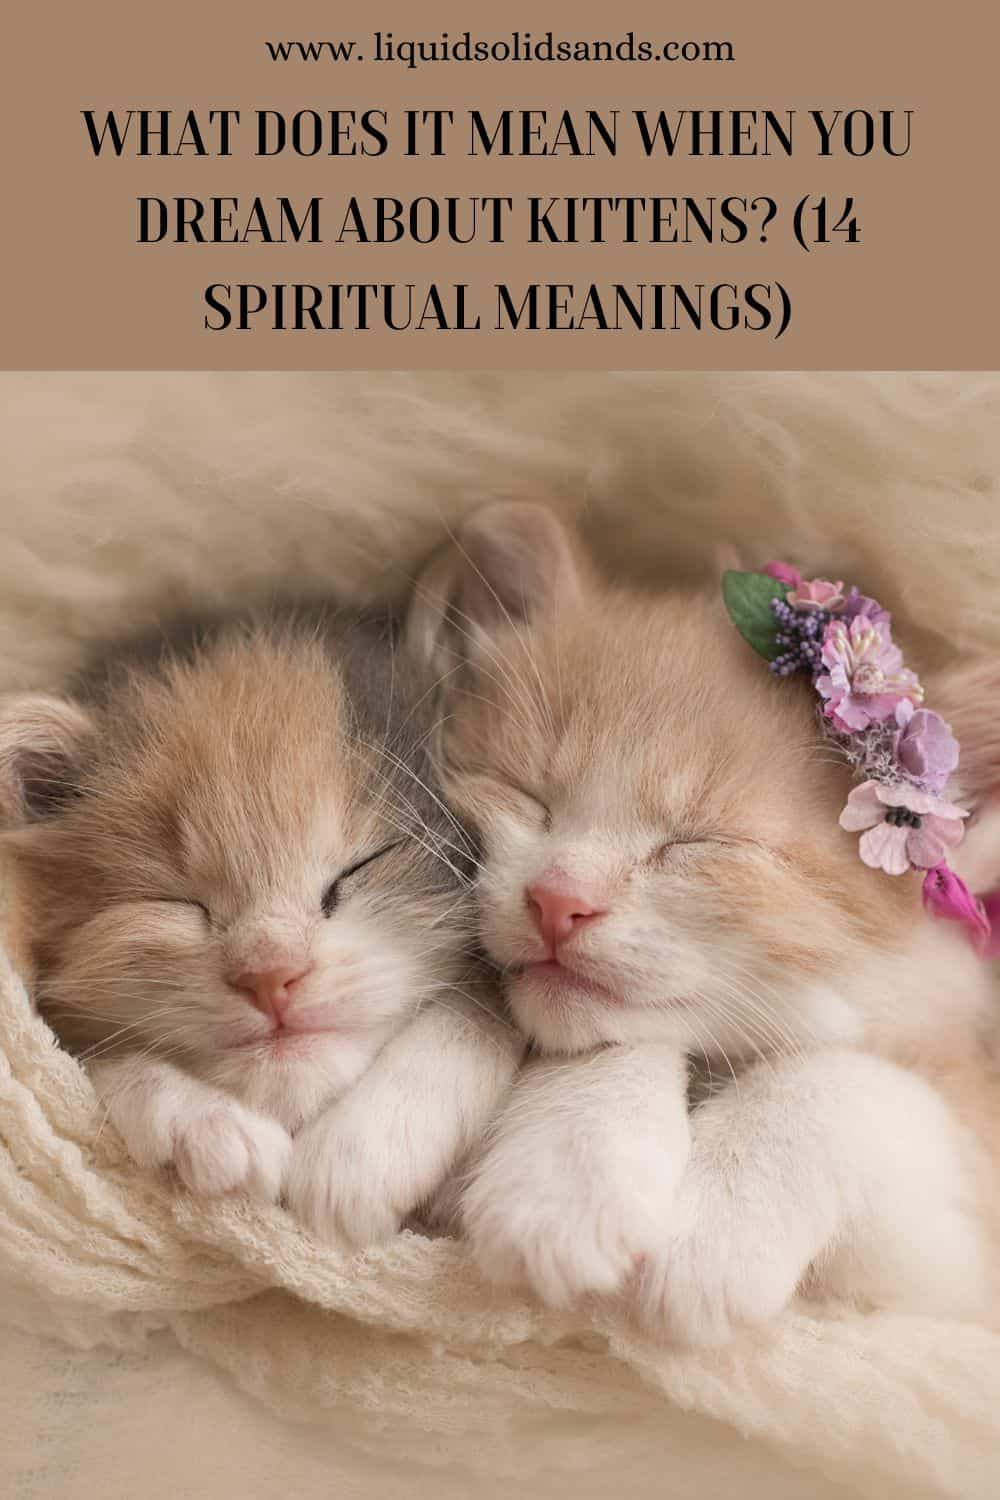 What Does It Mean When You Dream About Kittens? (14 Spiritual Meanings)